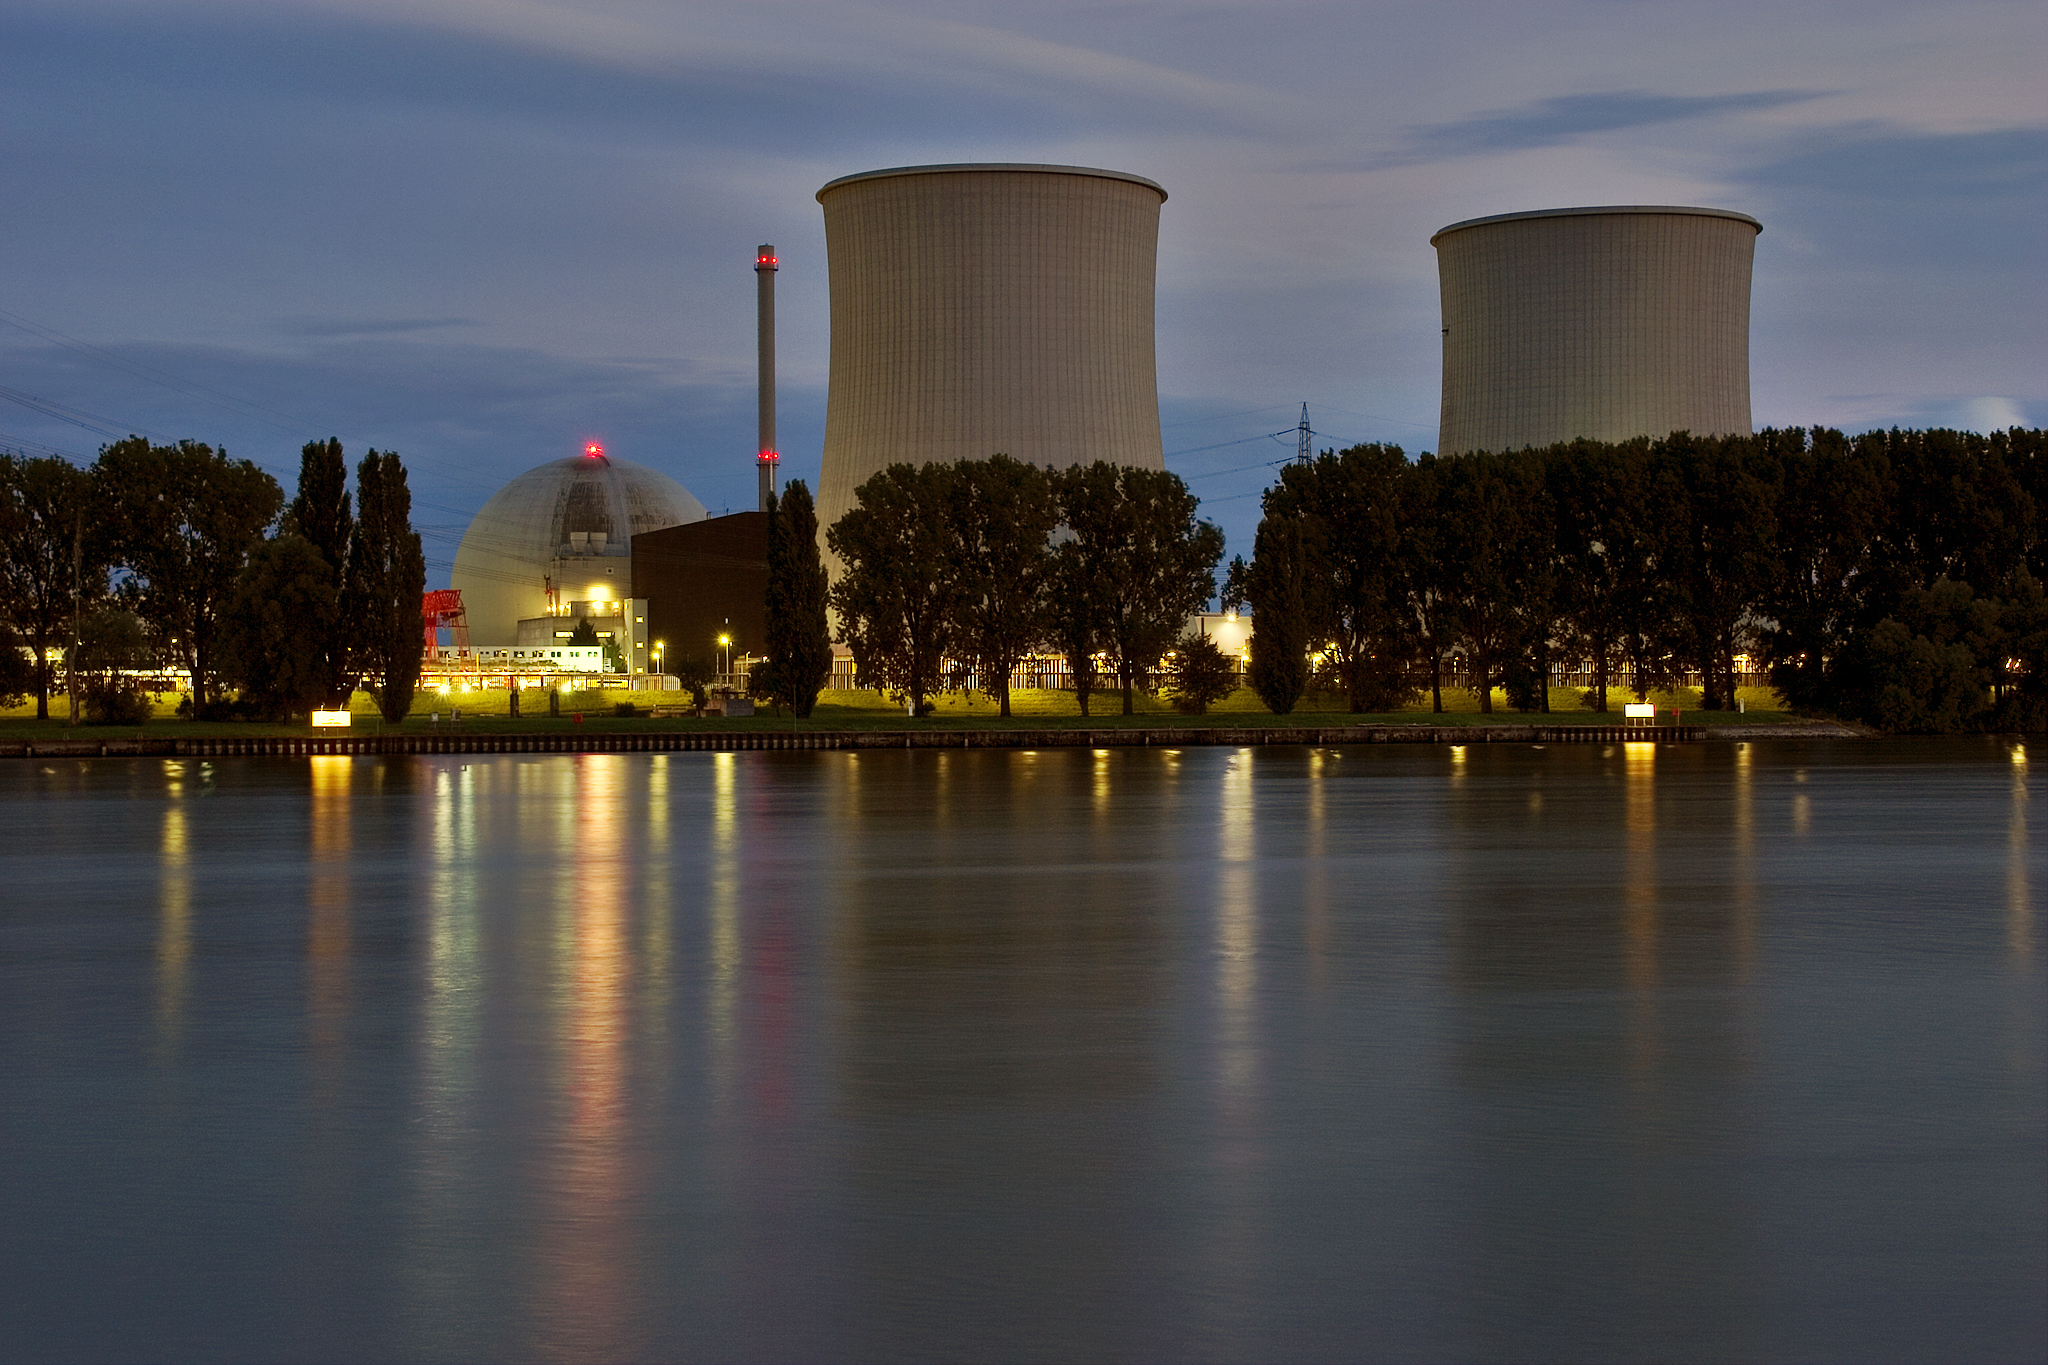 Nuclear Power Plant by Andy Rudorfer